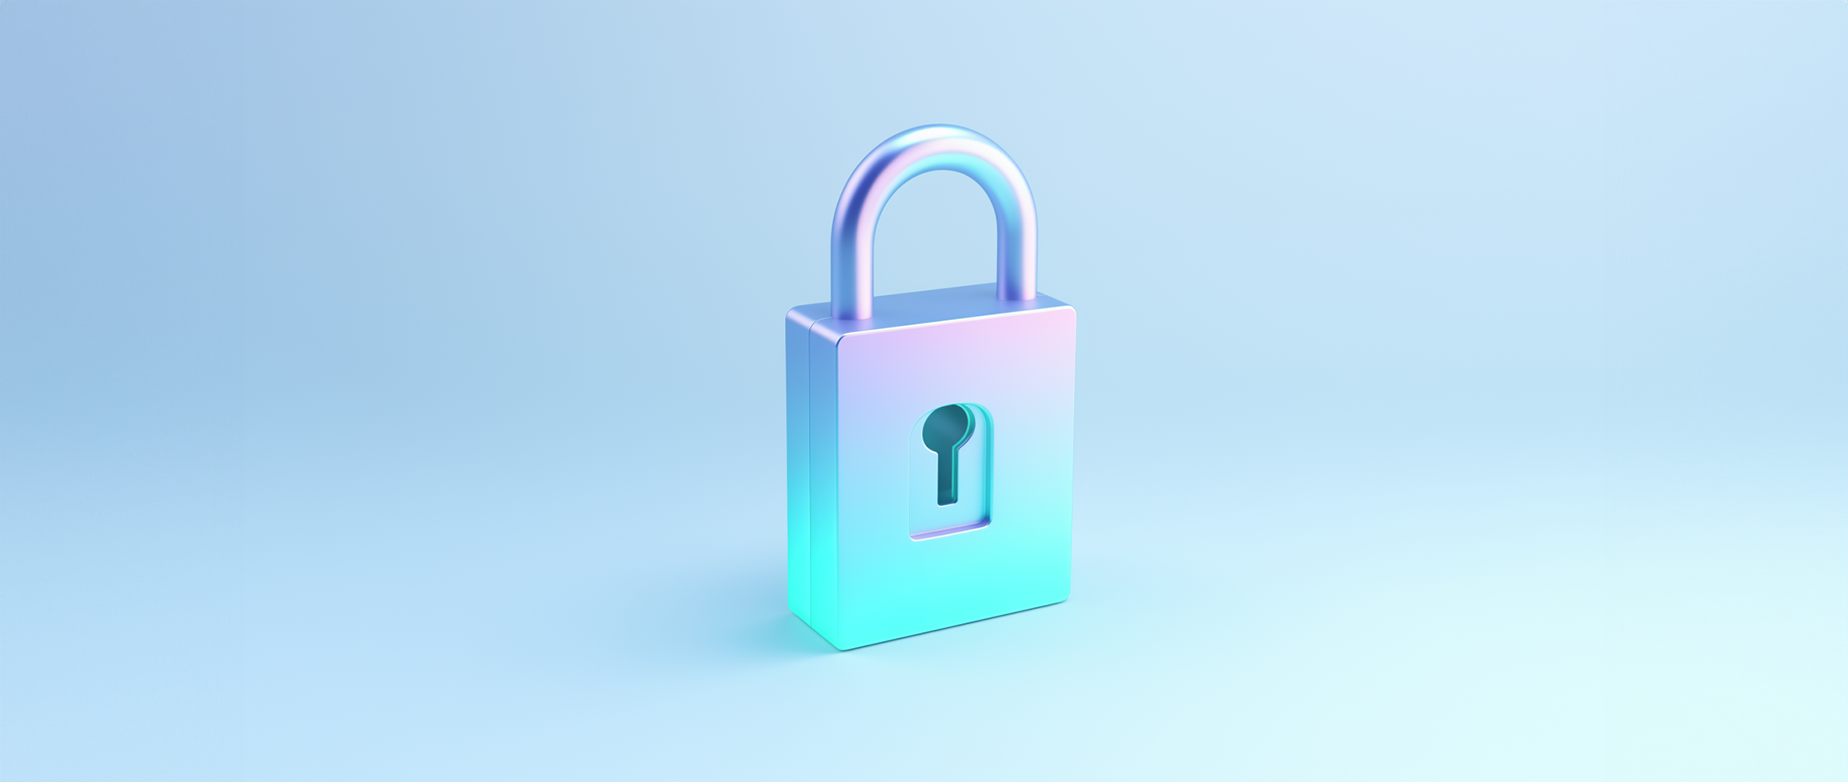 Shiny padlock on a light blue background: ecommerce security for your online store